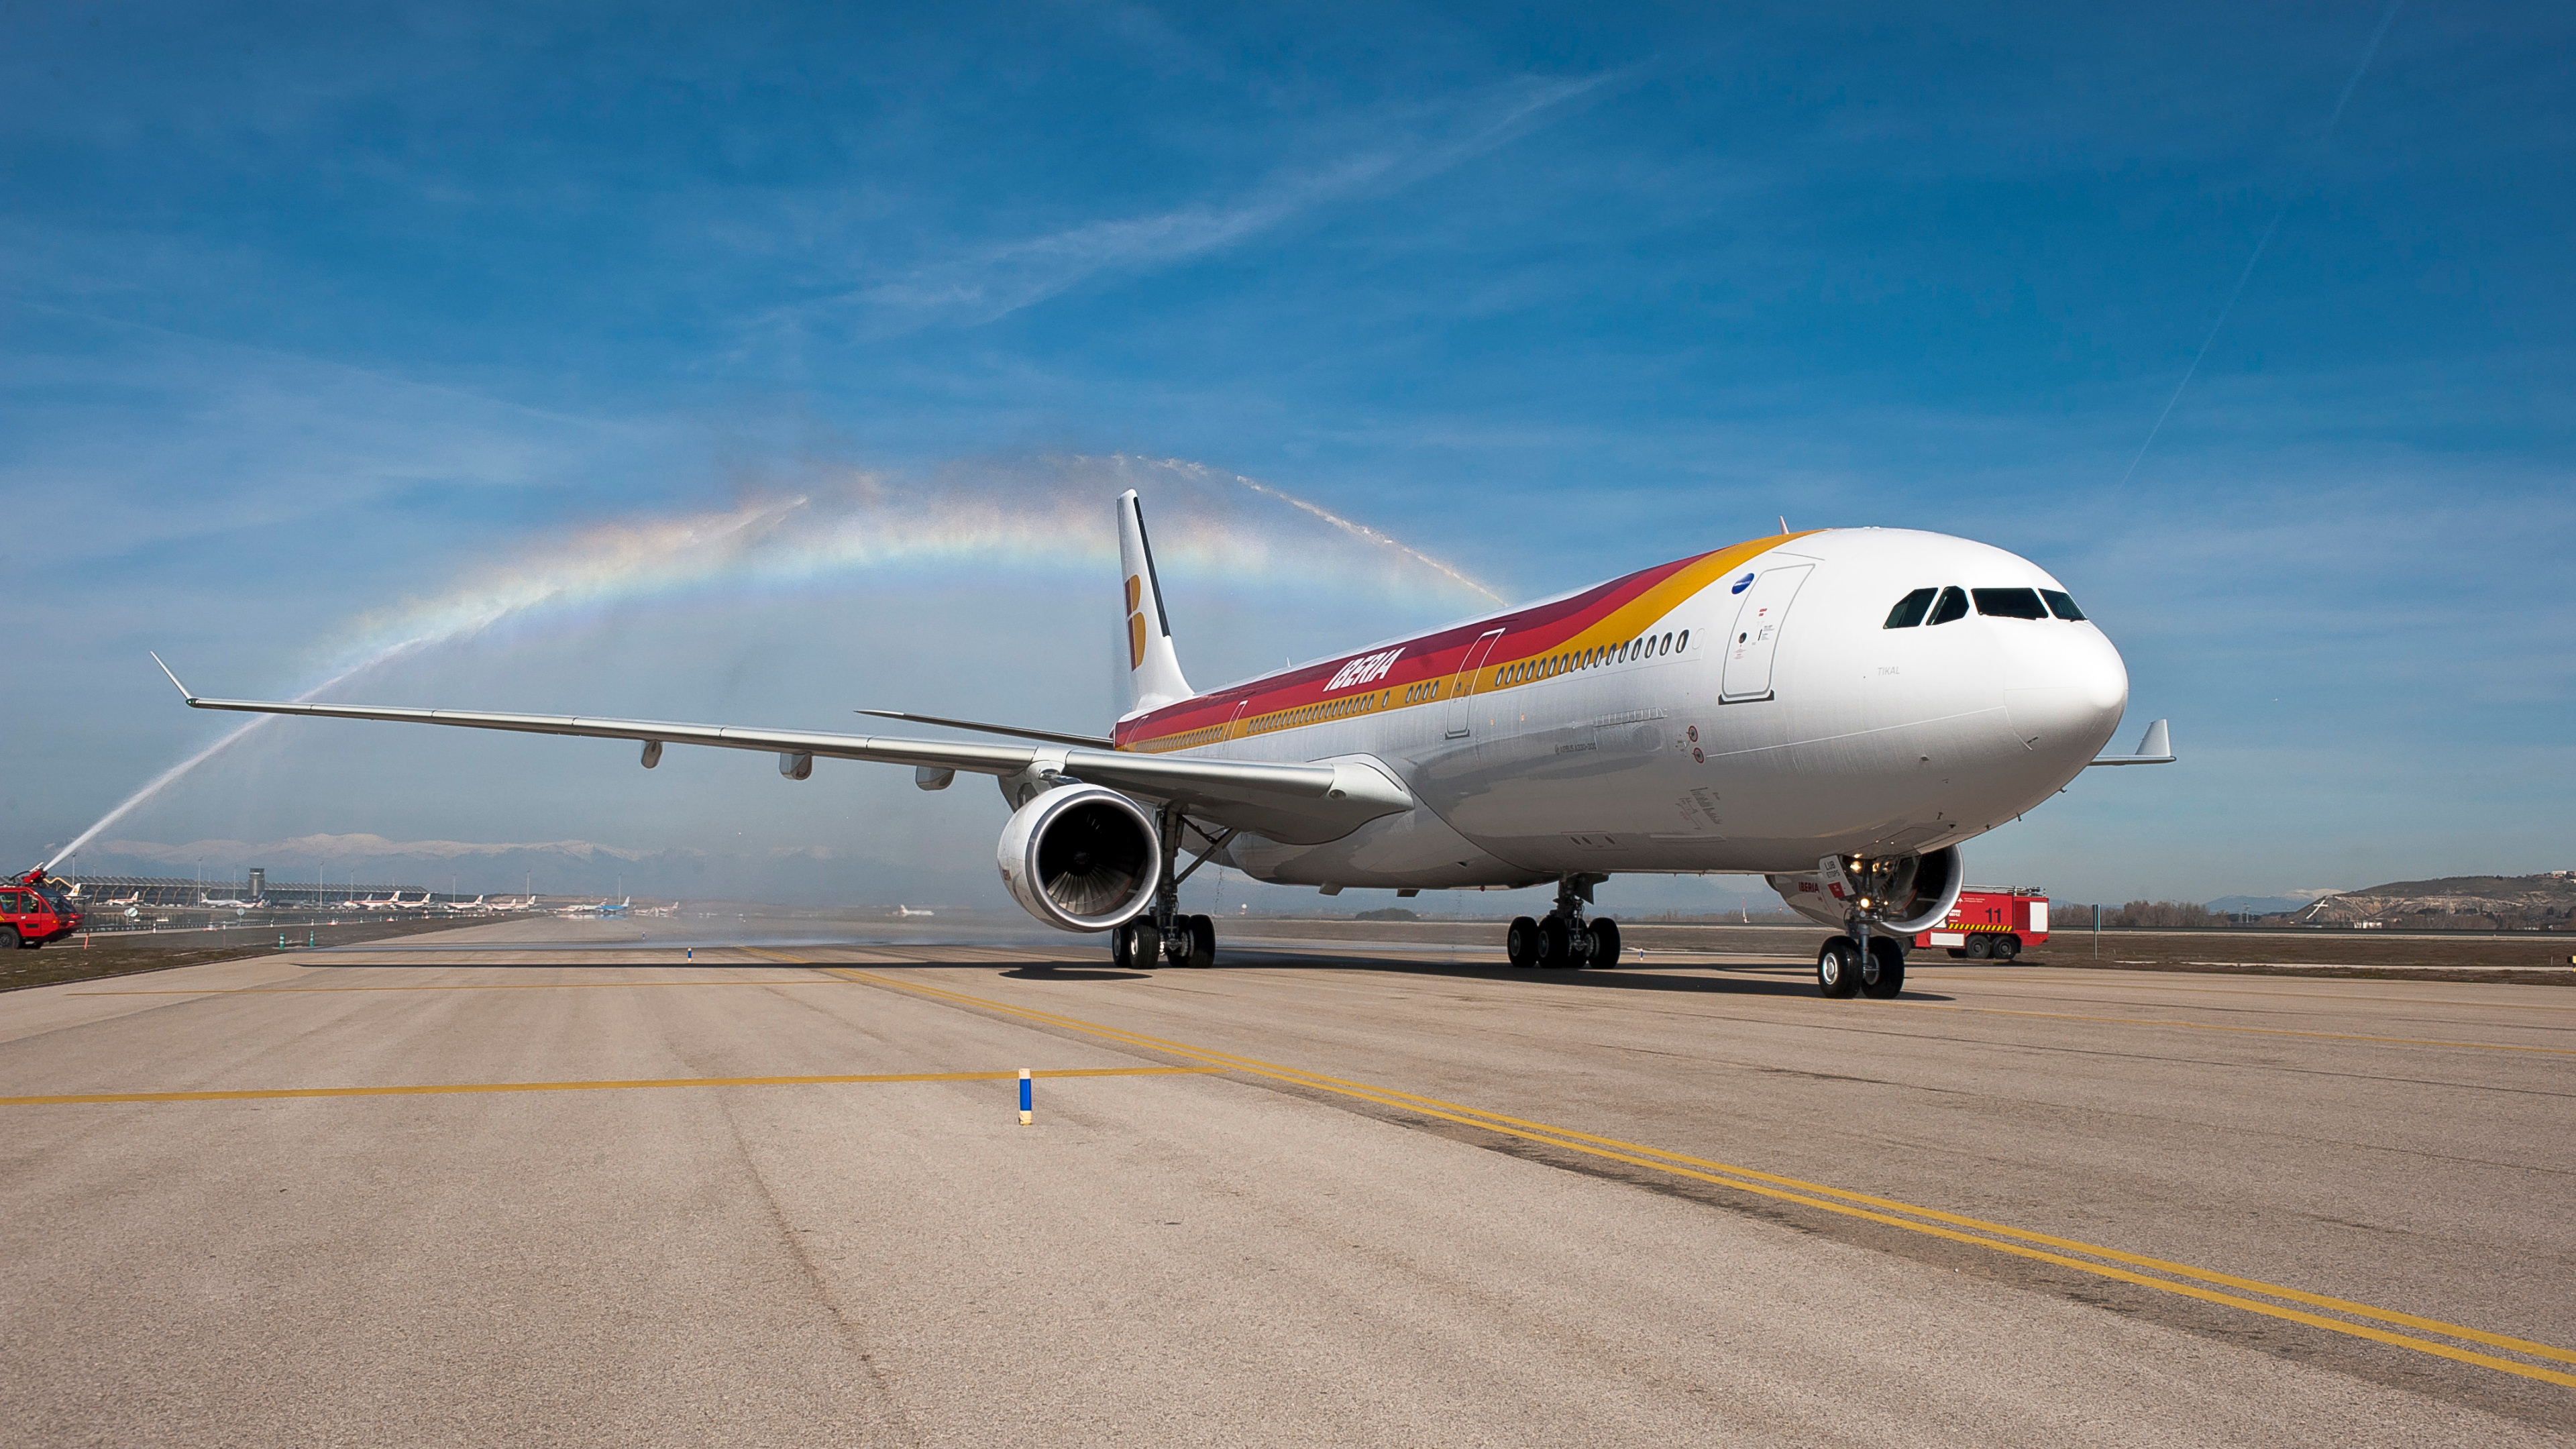 Airbus A330 Wallpaper And Background Image